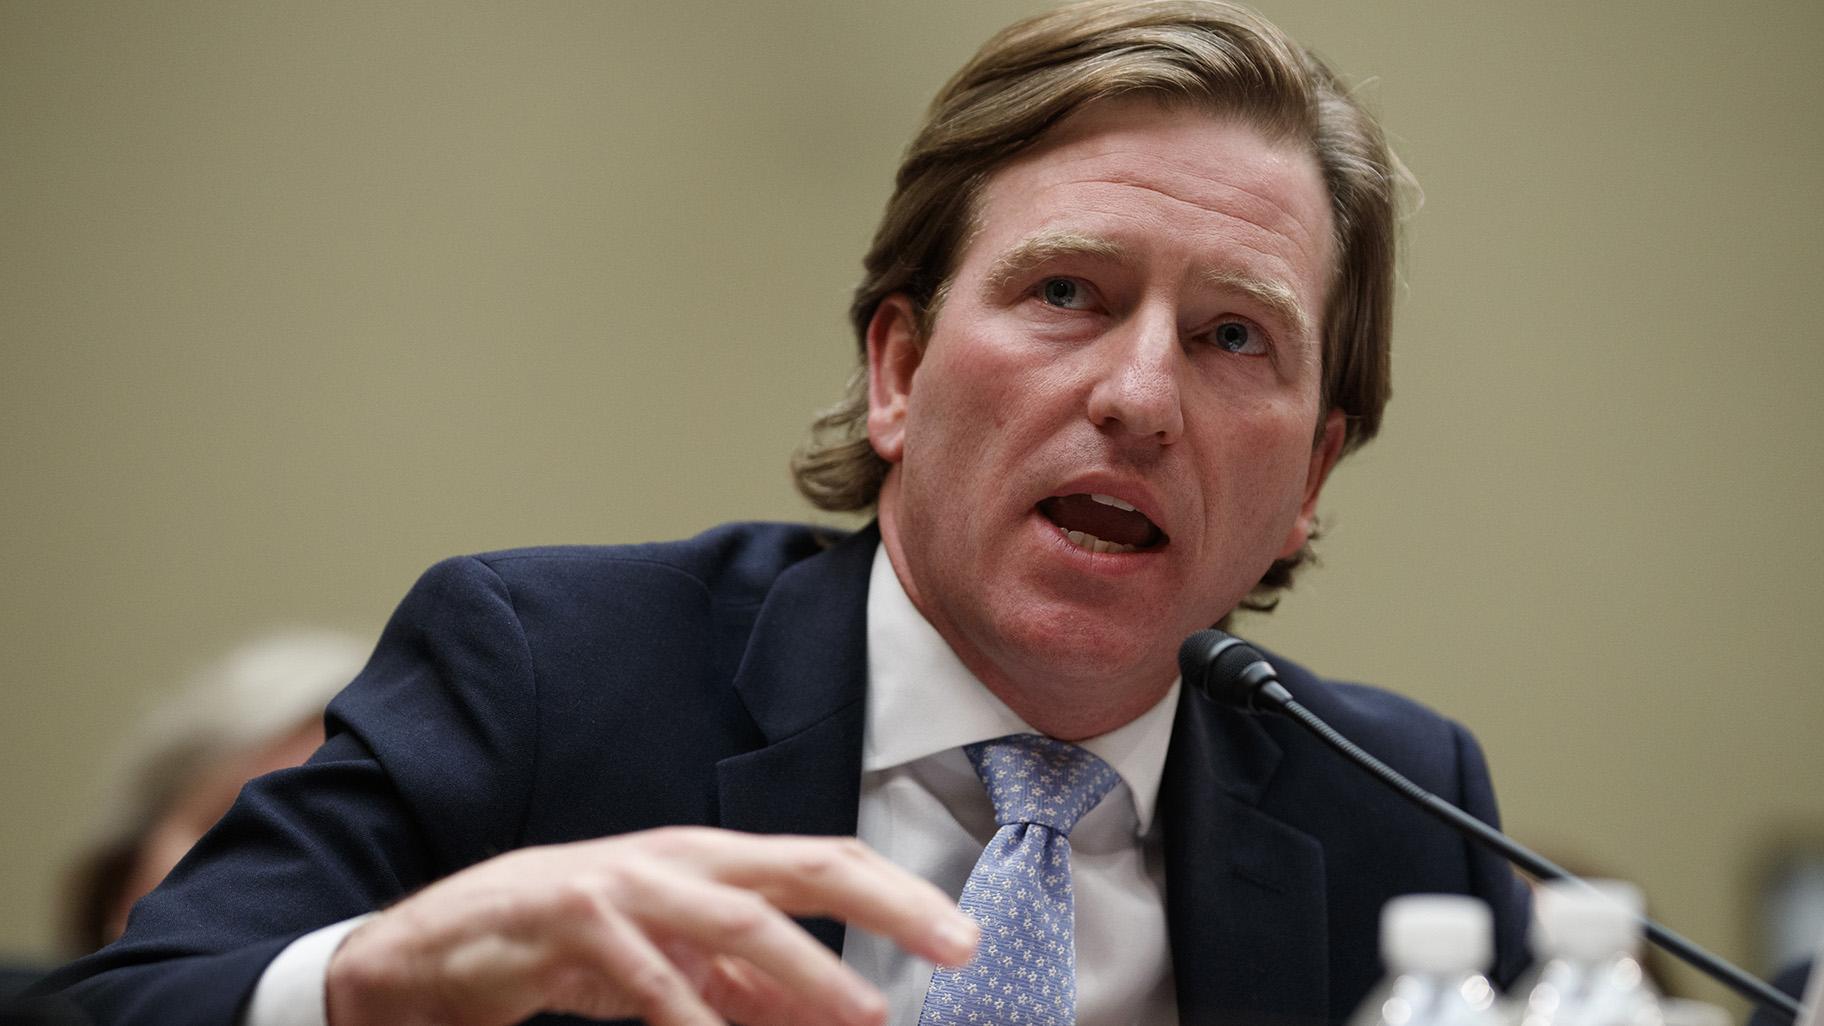 In this May 22, 2019 file photo, Department of Homeland Security Cybersecurity and Infrastructure Security Agency Director Christopher Krebs testifies on Capitol Hill in Washington. (AP Photo / Carolyn Kaster, File)